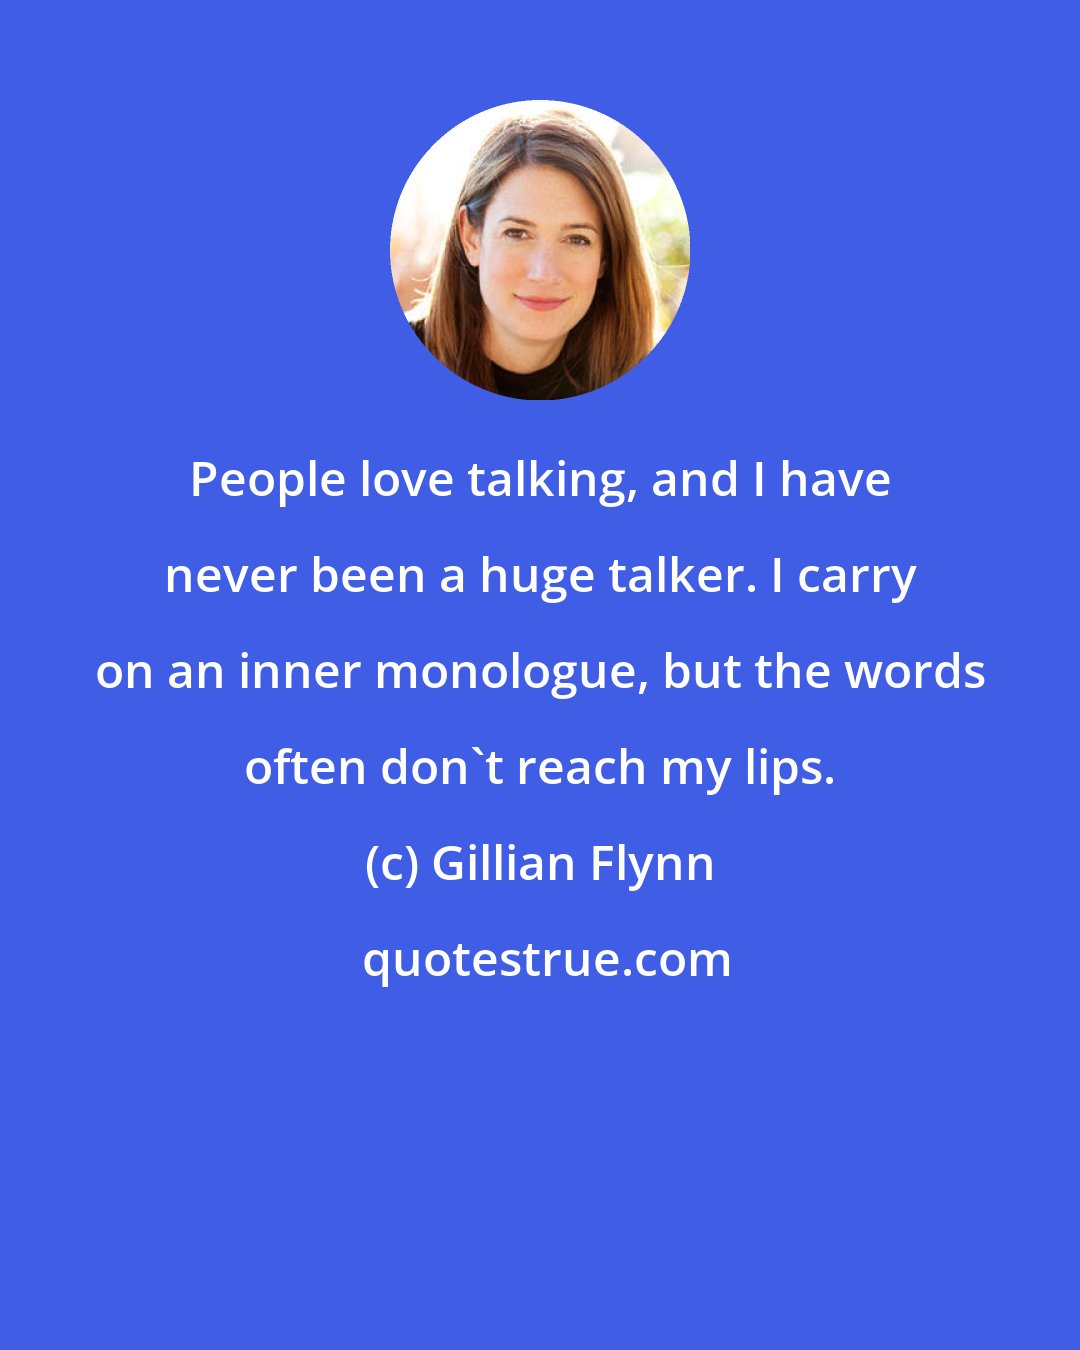 Gillian Flynn: People love talking, and I have never been a huge talker. I carry on an inner monologue, but the words often don't reach my lips.